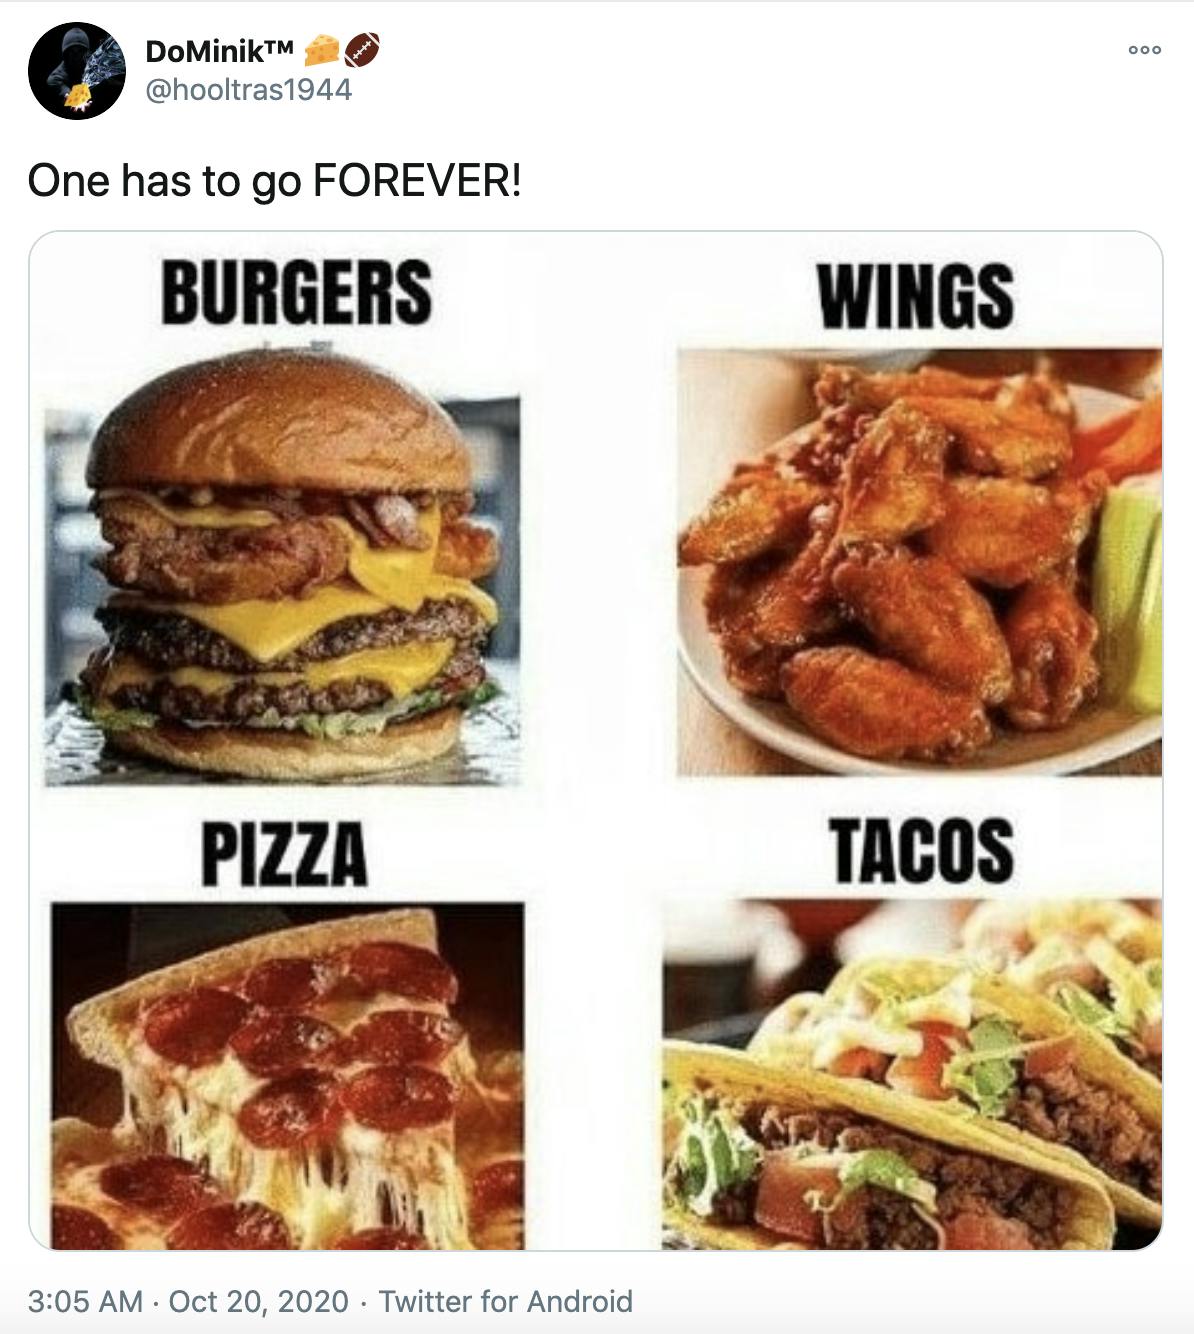 'one must go FOREVER' pictures of a burger, wings, pizza and tacos